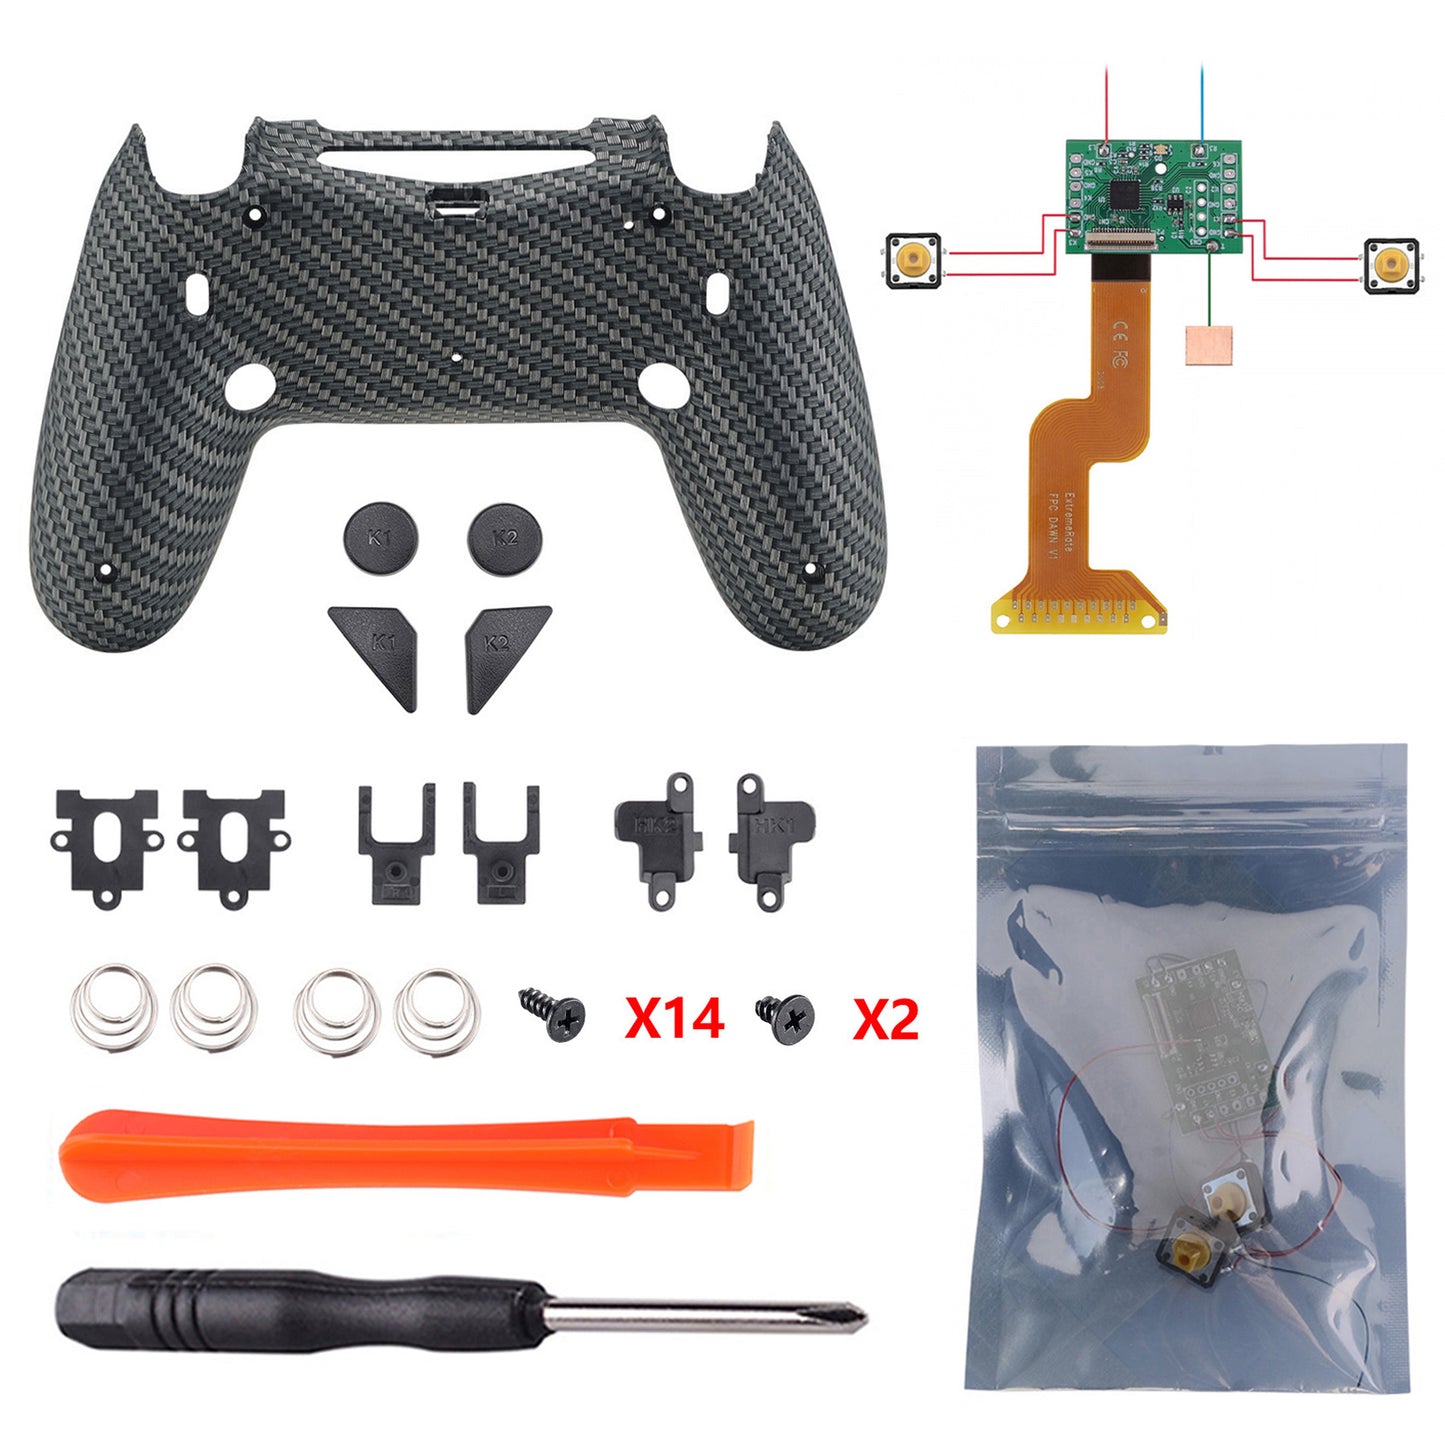 eXtremeRate Buttons & Stop Board Remap Back JDM Trigger Kit Shell – 2.0 for Lock ps4 Upgrade Fiber PS4 Trigger for & CUH-ZCT2 Controller, & Back Dawn 040/050/055 Controller FlashShot Carbon Redesigned